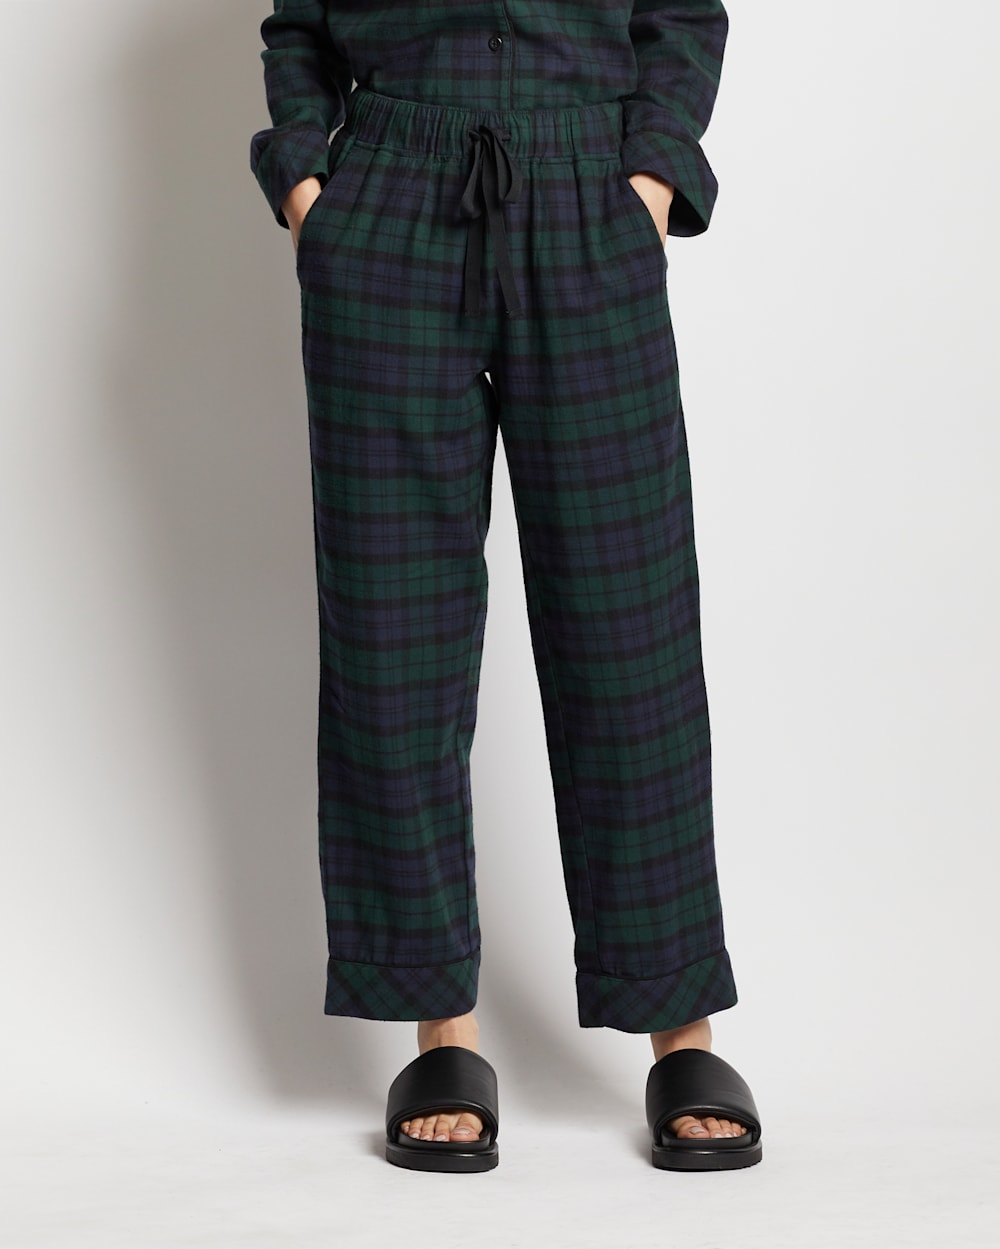 ALTERNATE VIEW OF WOMEN'S PAJAMA PANTS IN GREEN/BLUE PLAID image number 3